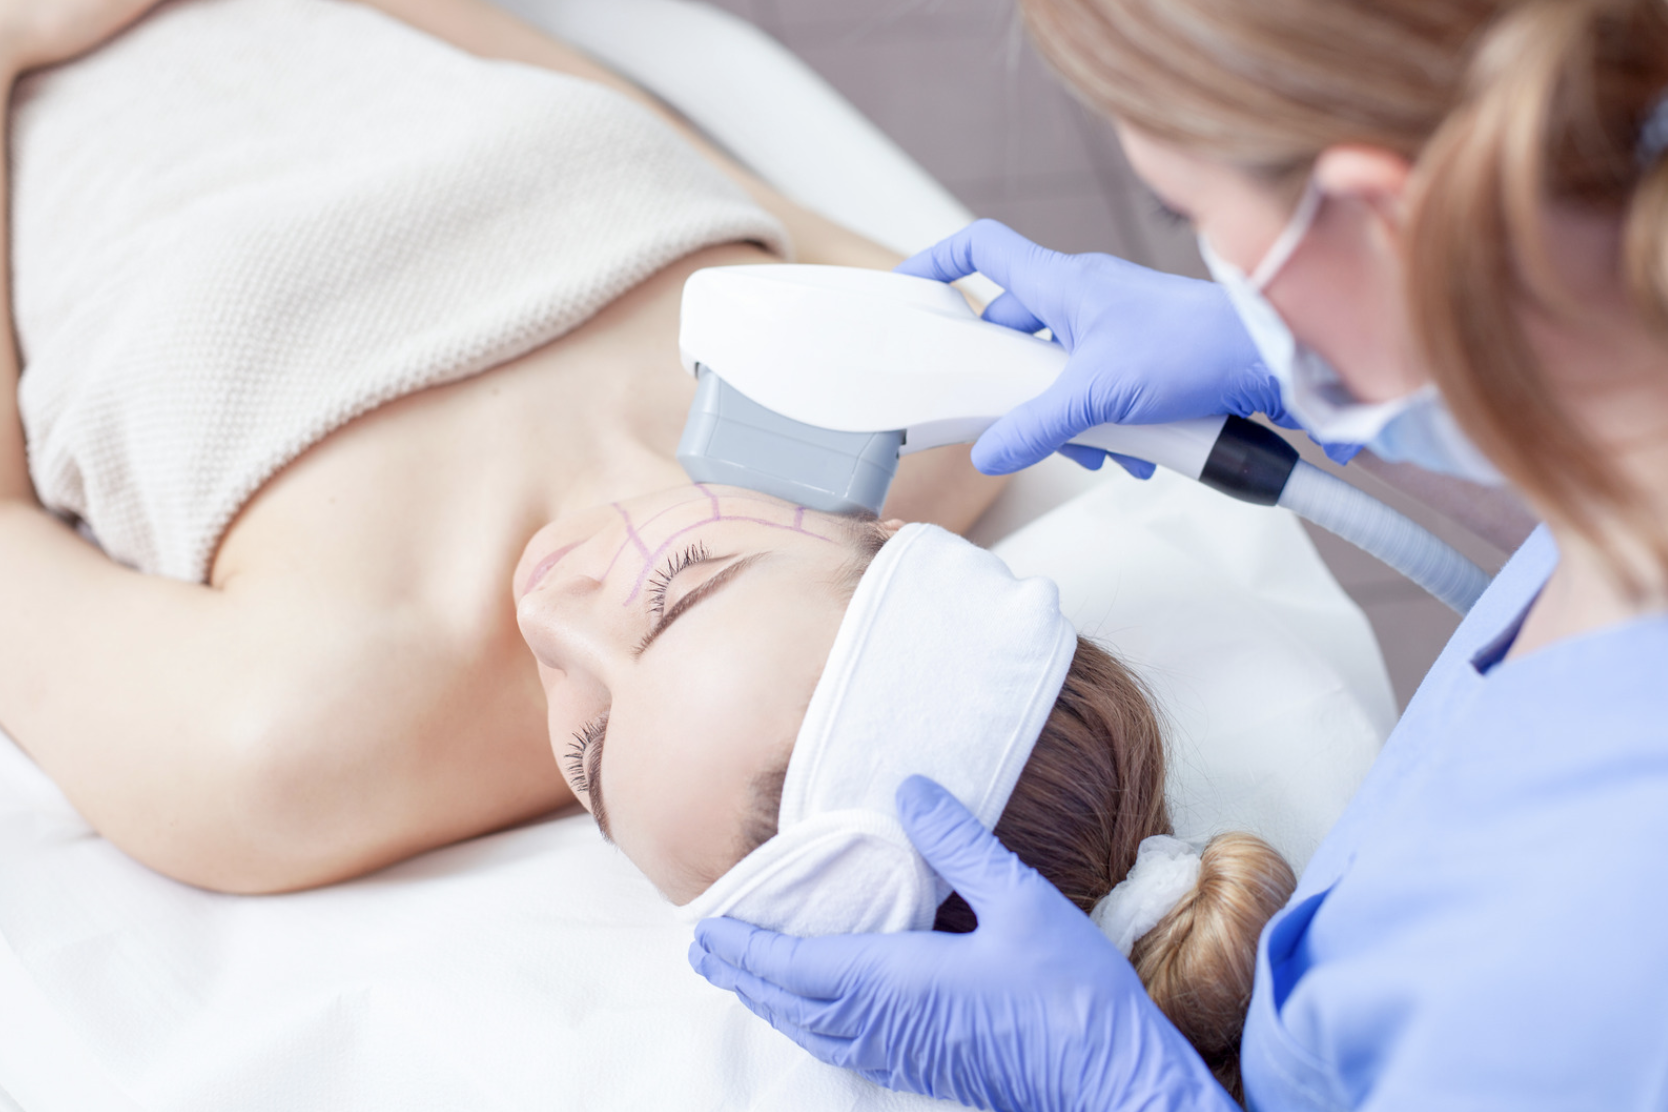 What is Ultherapy and How Does it Work?